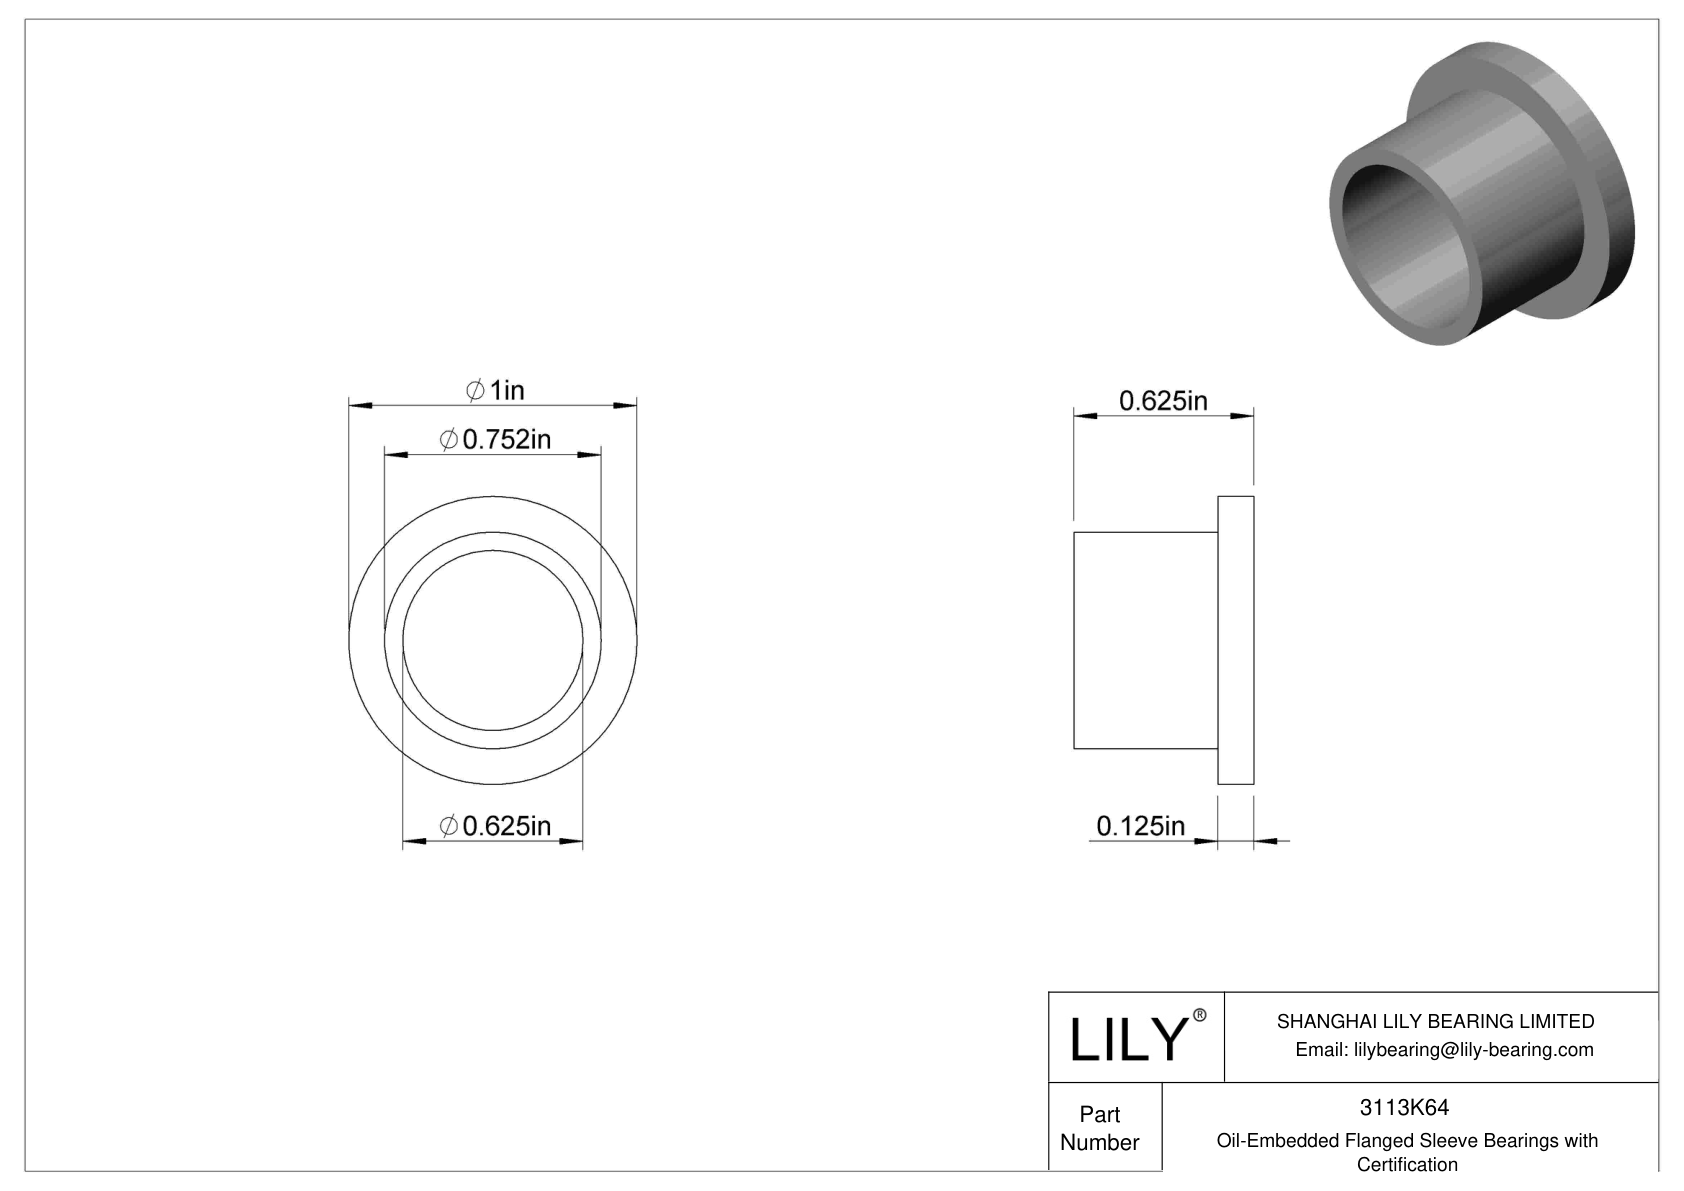 DBBDKGE Oil-Embedded Flanged Sleeve Bearings with Certification cad drawing